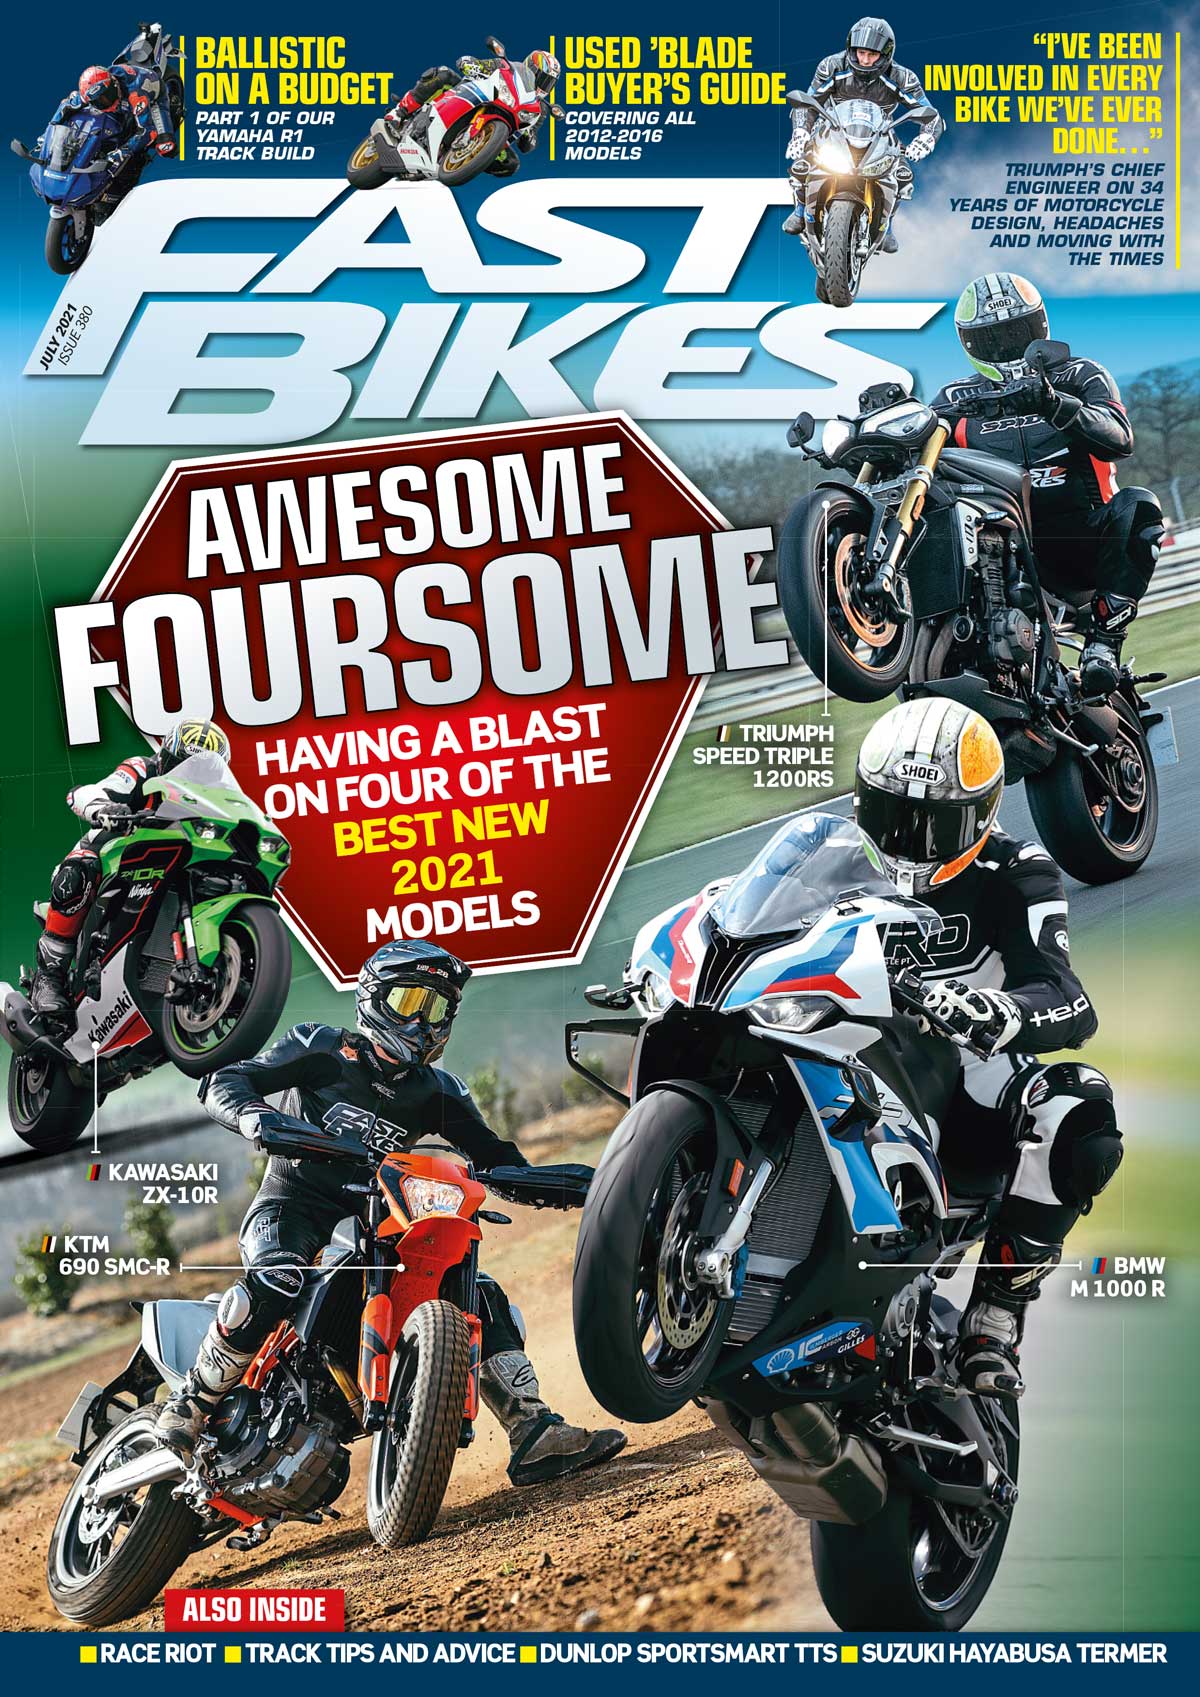 PREVIEW: Inside July issue of Fast Bikes magazine